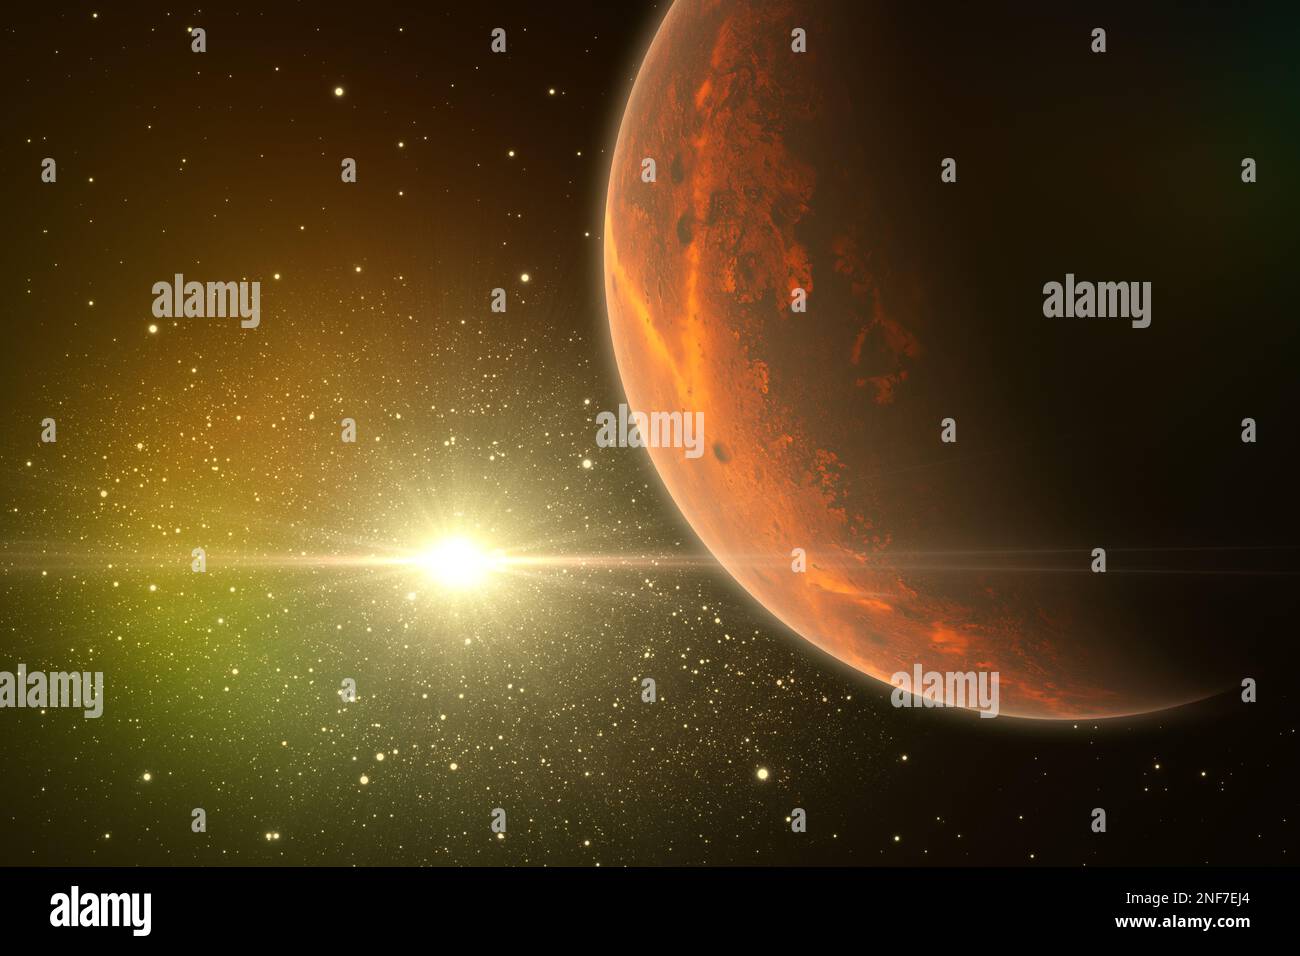 Exoplanet or Extrasolar planet with distant Quasar, extremely luminous active Galactic nucleus. 3D illustration Stock Photo